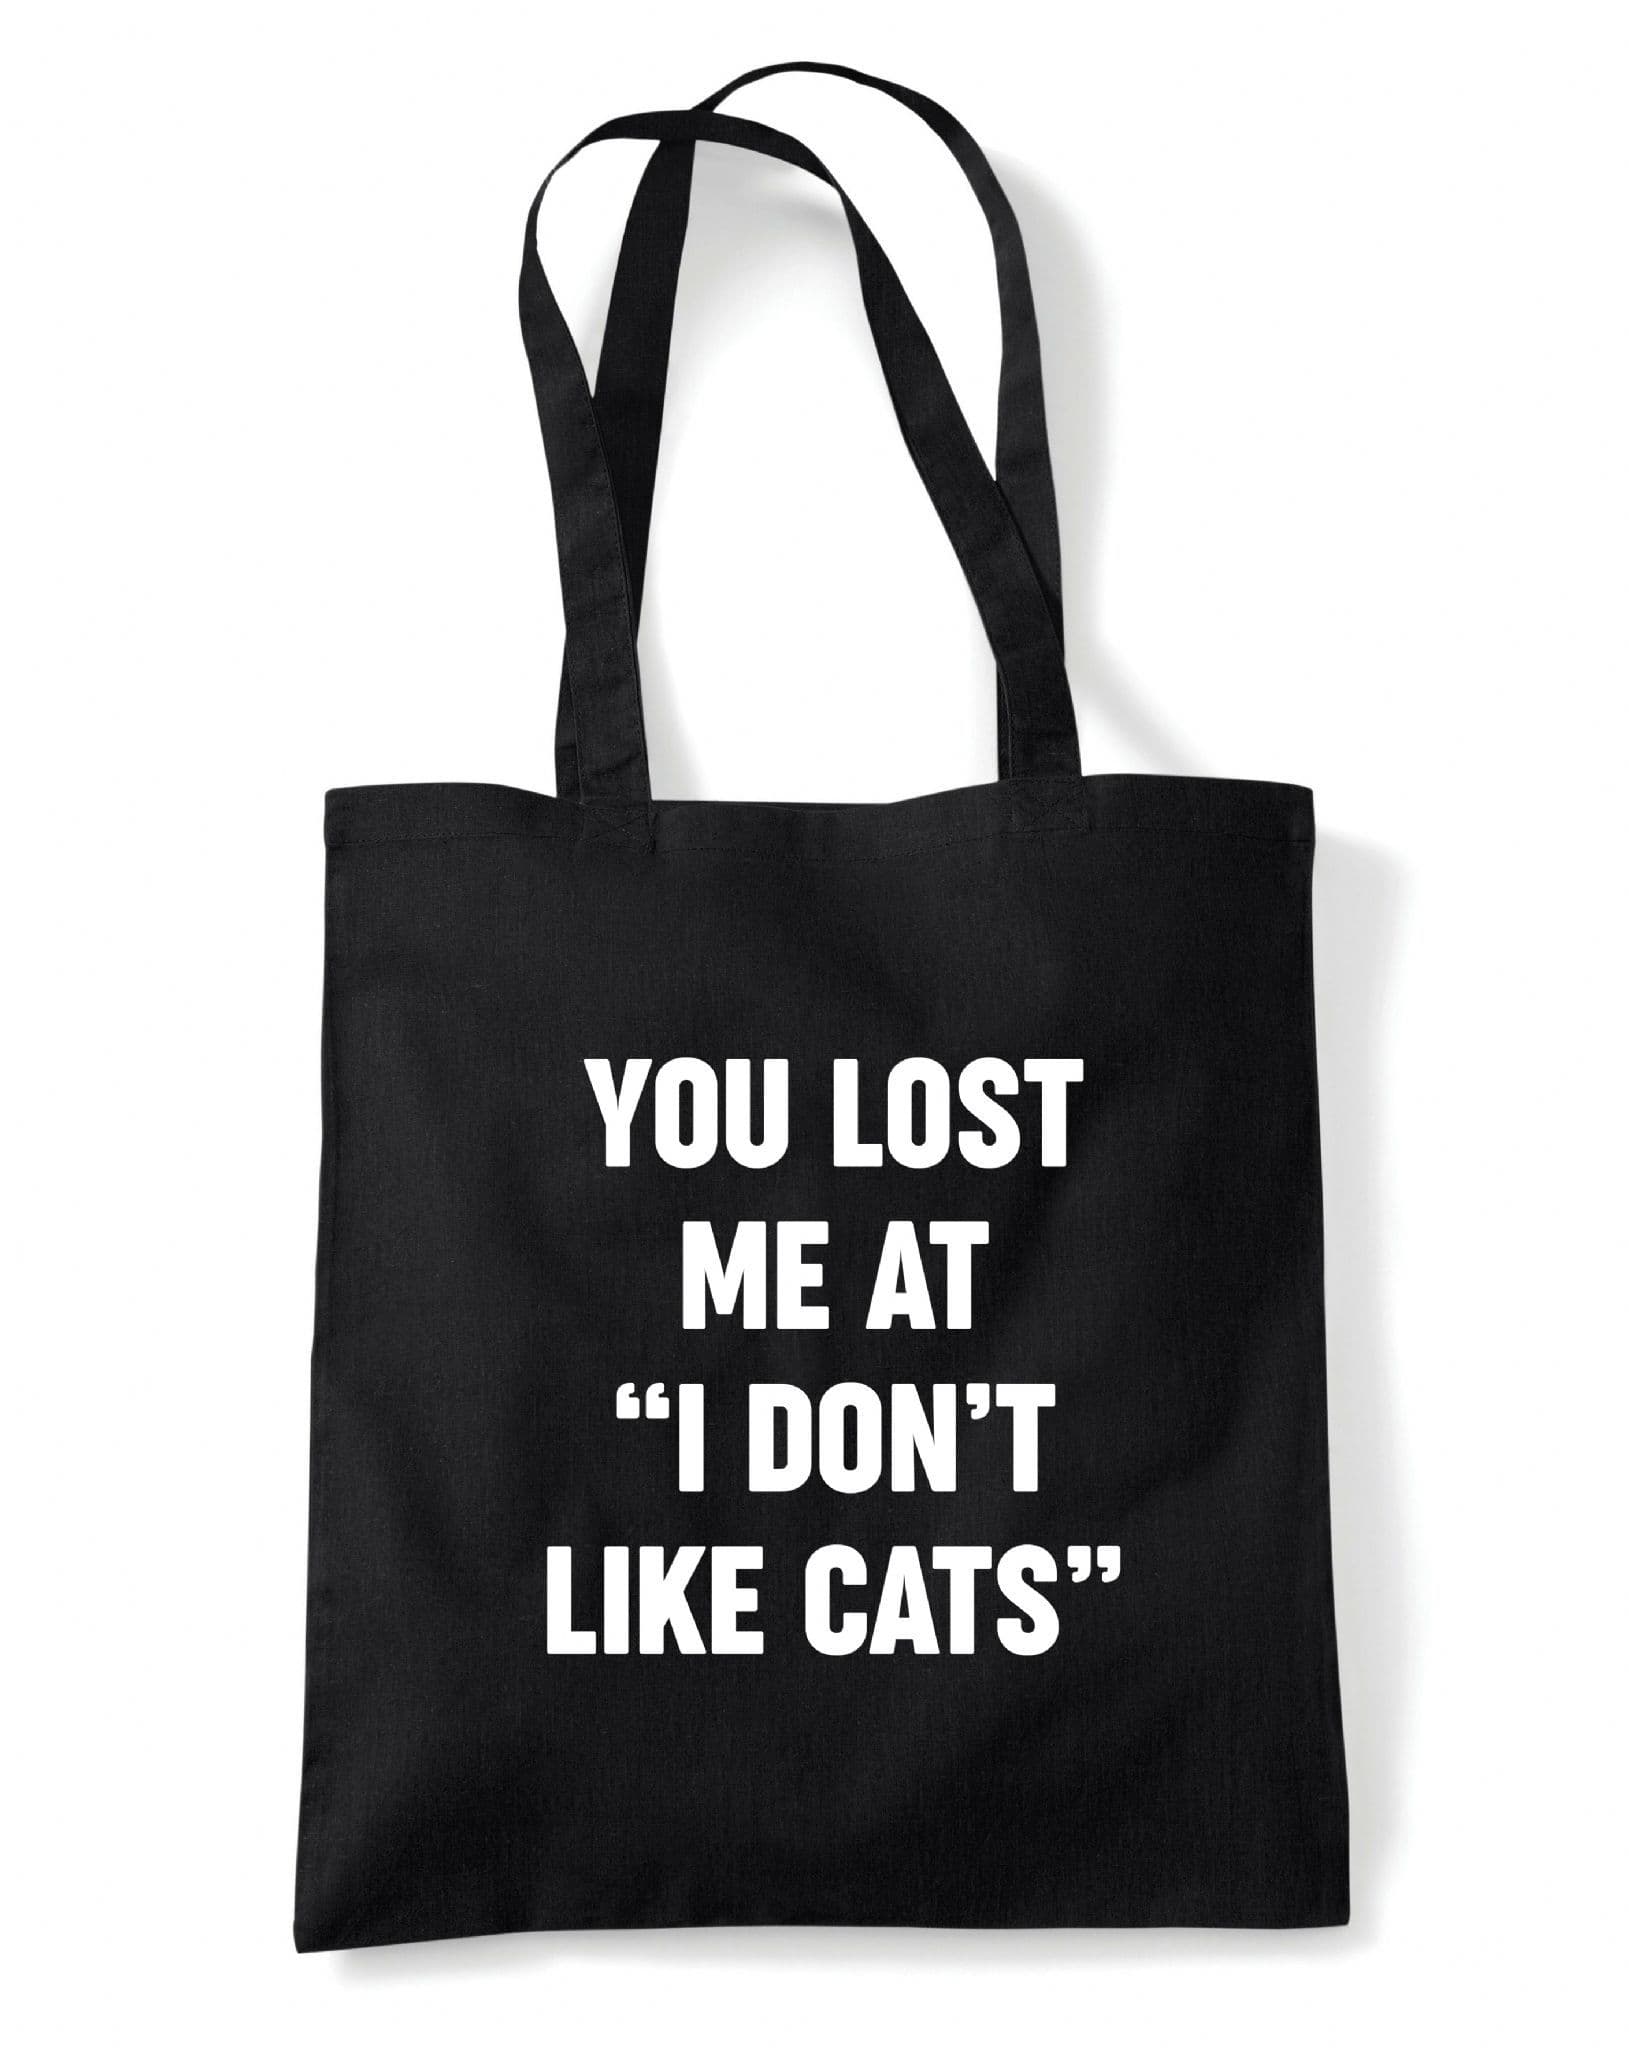 You Lost Me At "I Don't Like Cats" Reusable Cotton Shopping Bag Tote with Long Handles